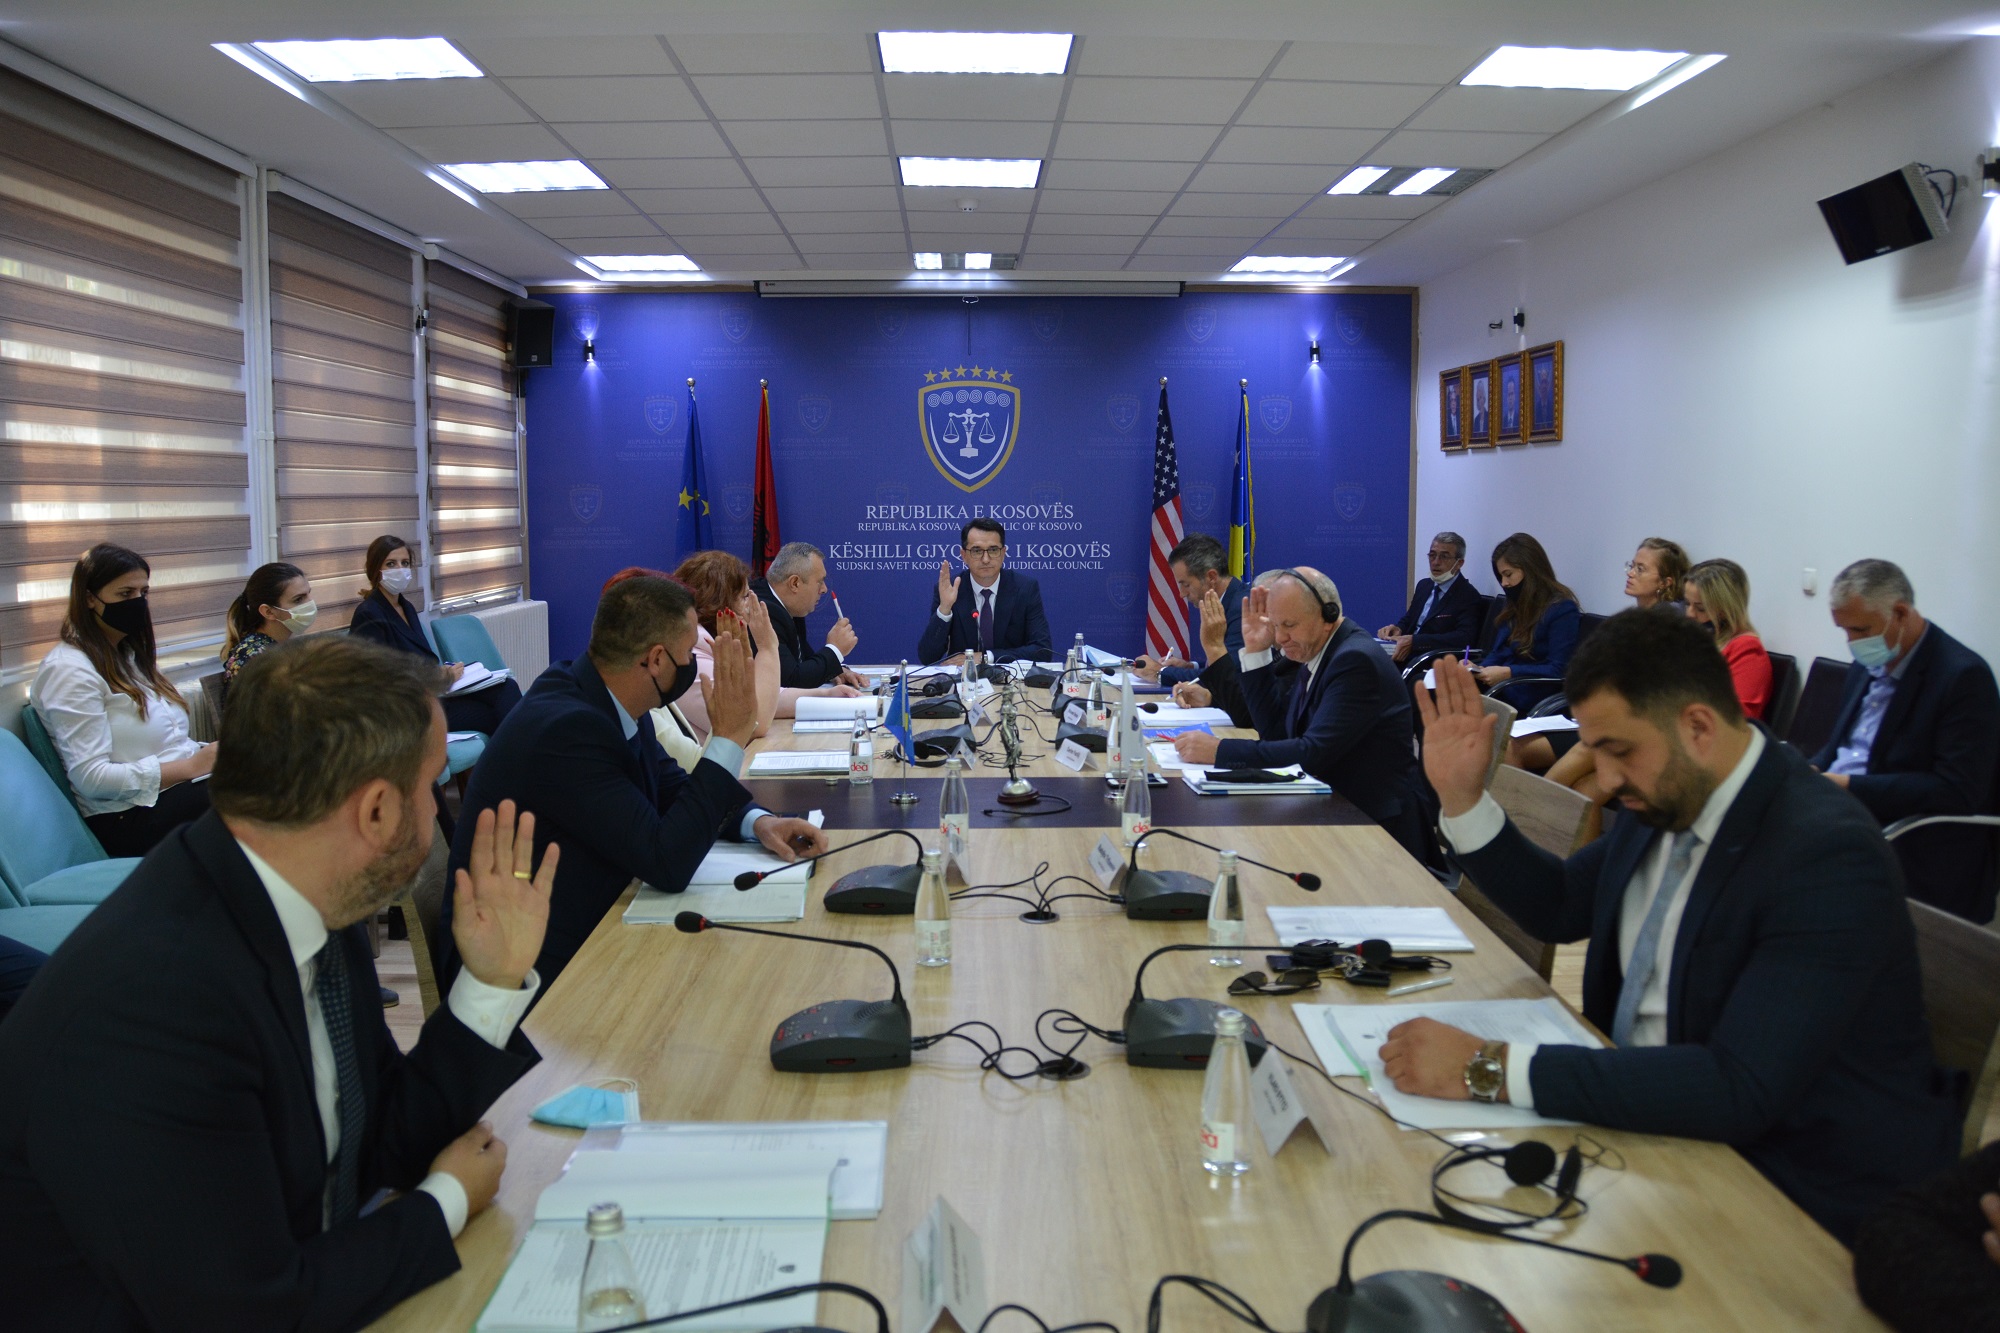 The 239th meeting of the KJC is held